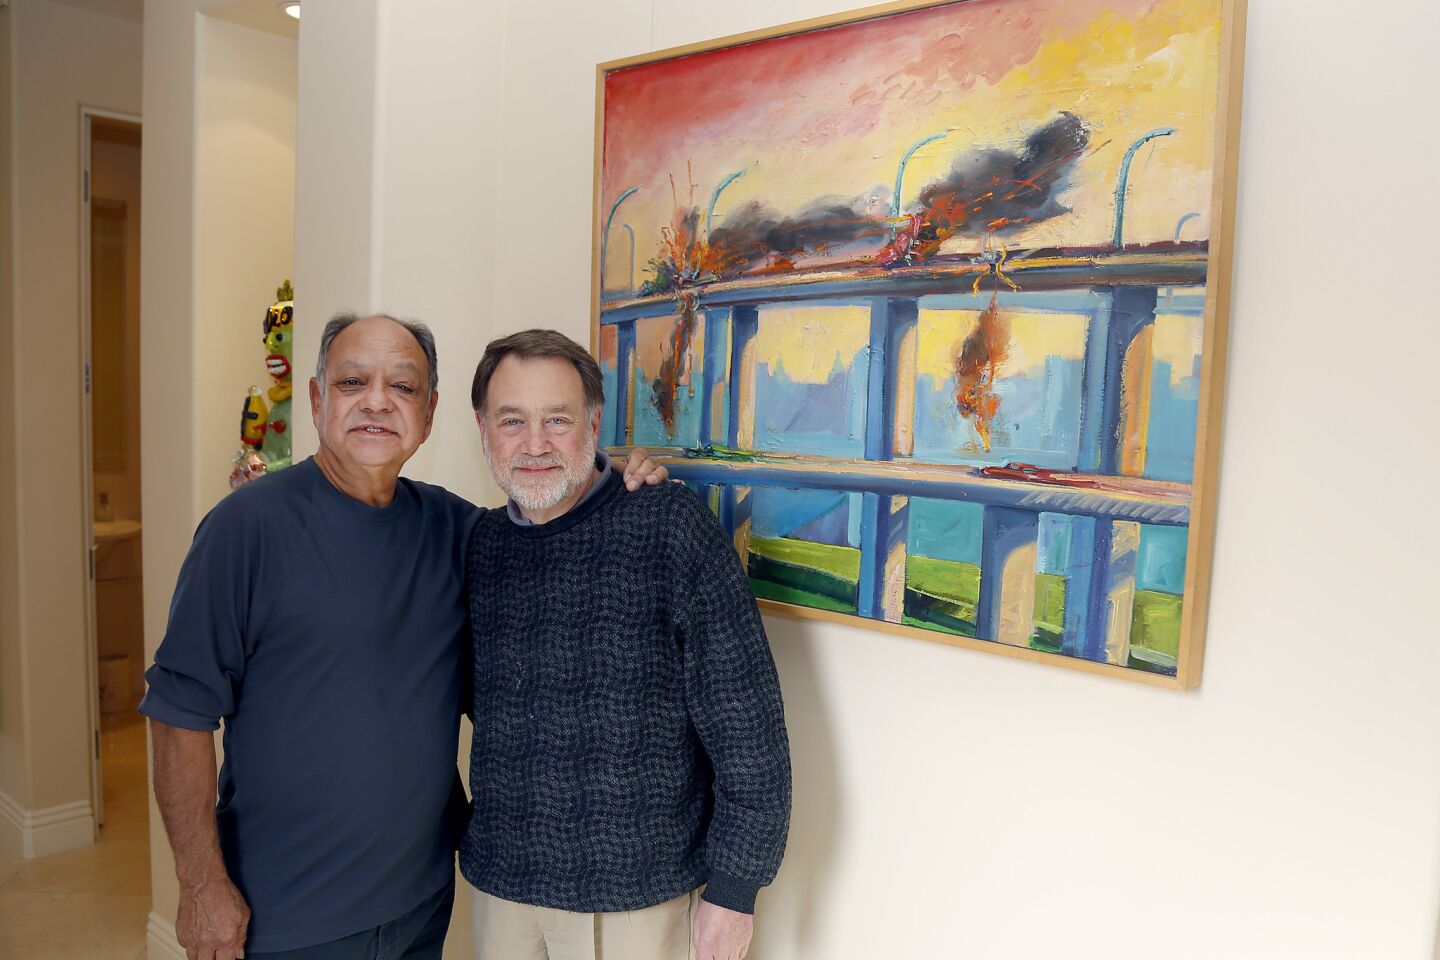 Arts and culture in pictures by The Times | Cheech Marin and Howard Fox